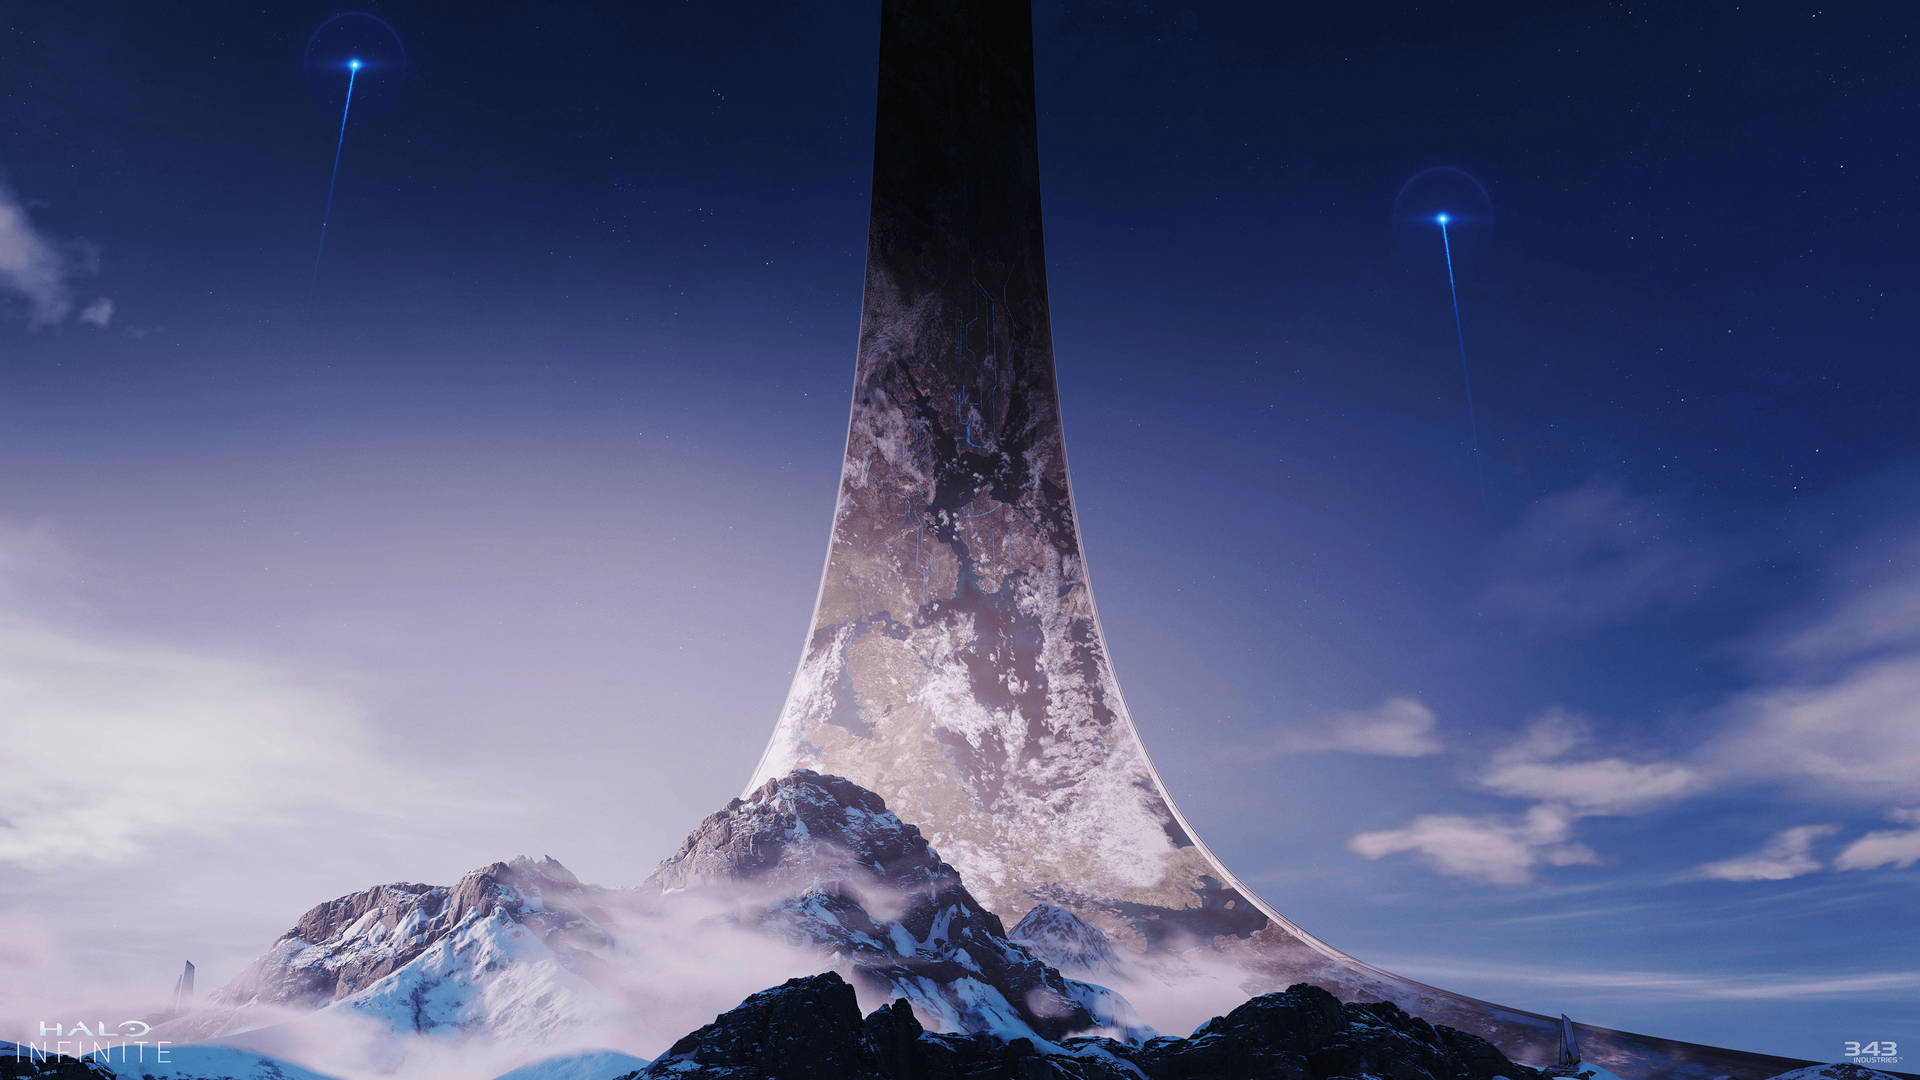 3840X2160 Halo Infinite Wallpaper and Background